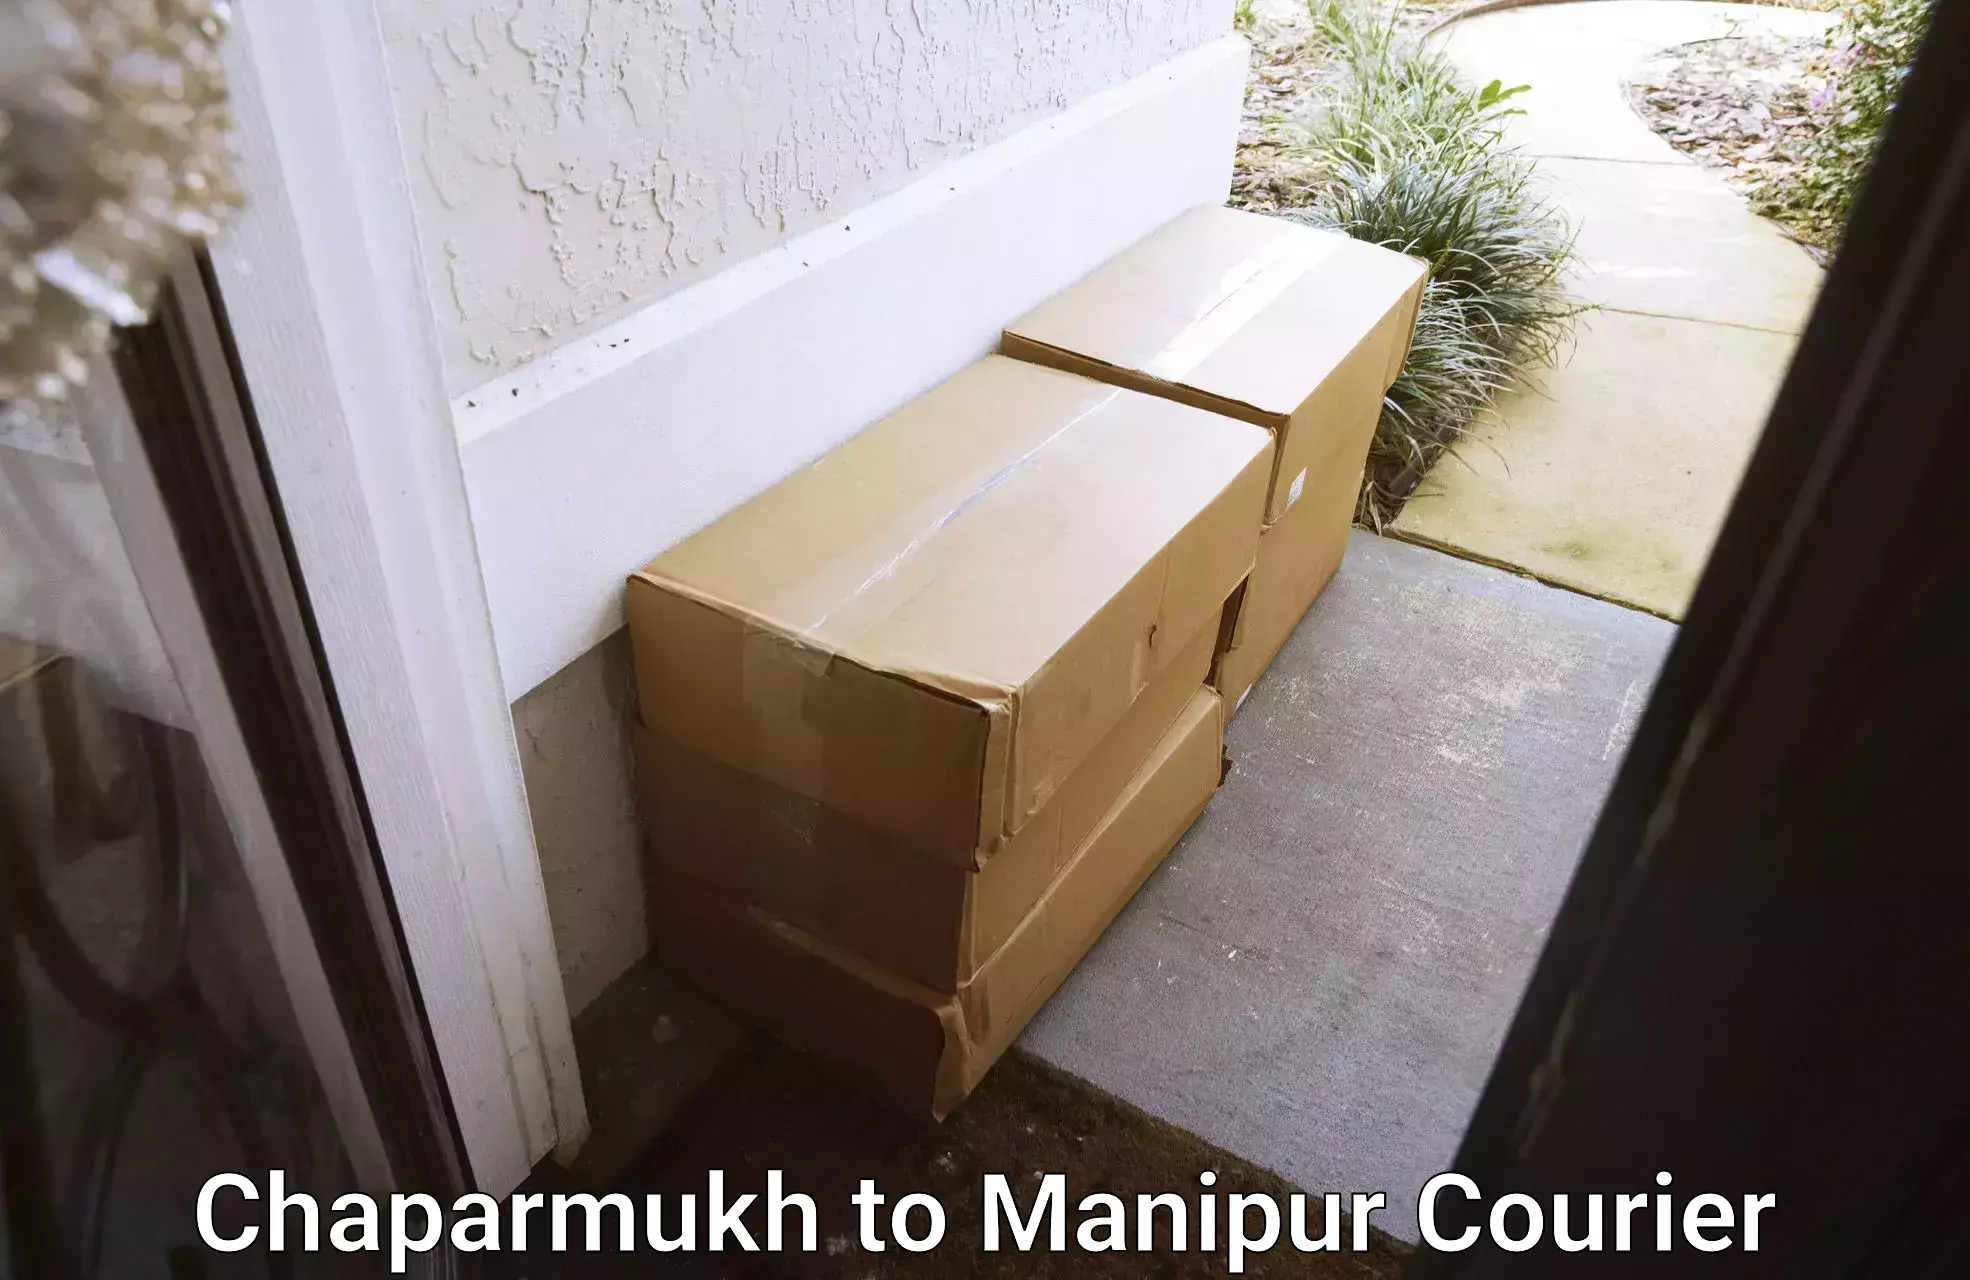 Efficient order fulfillment Chaparmukh to Manipur